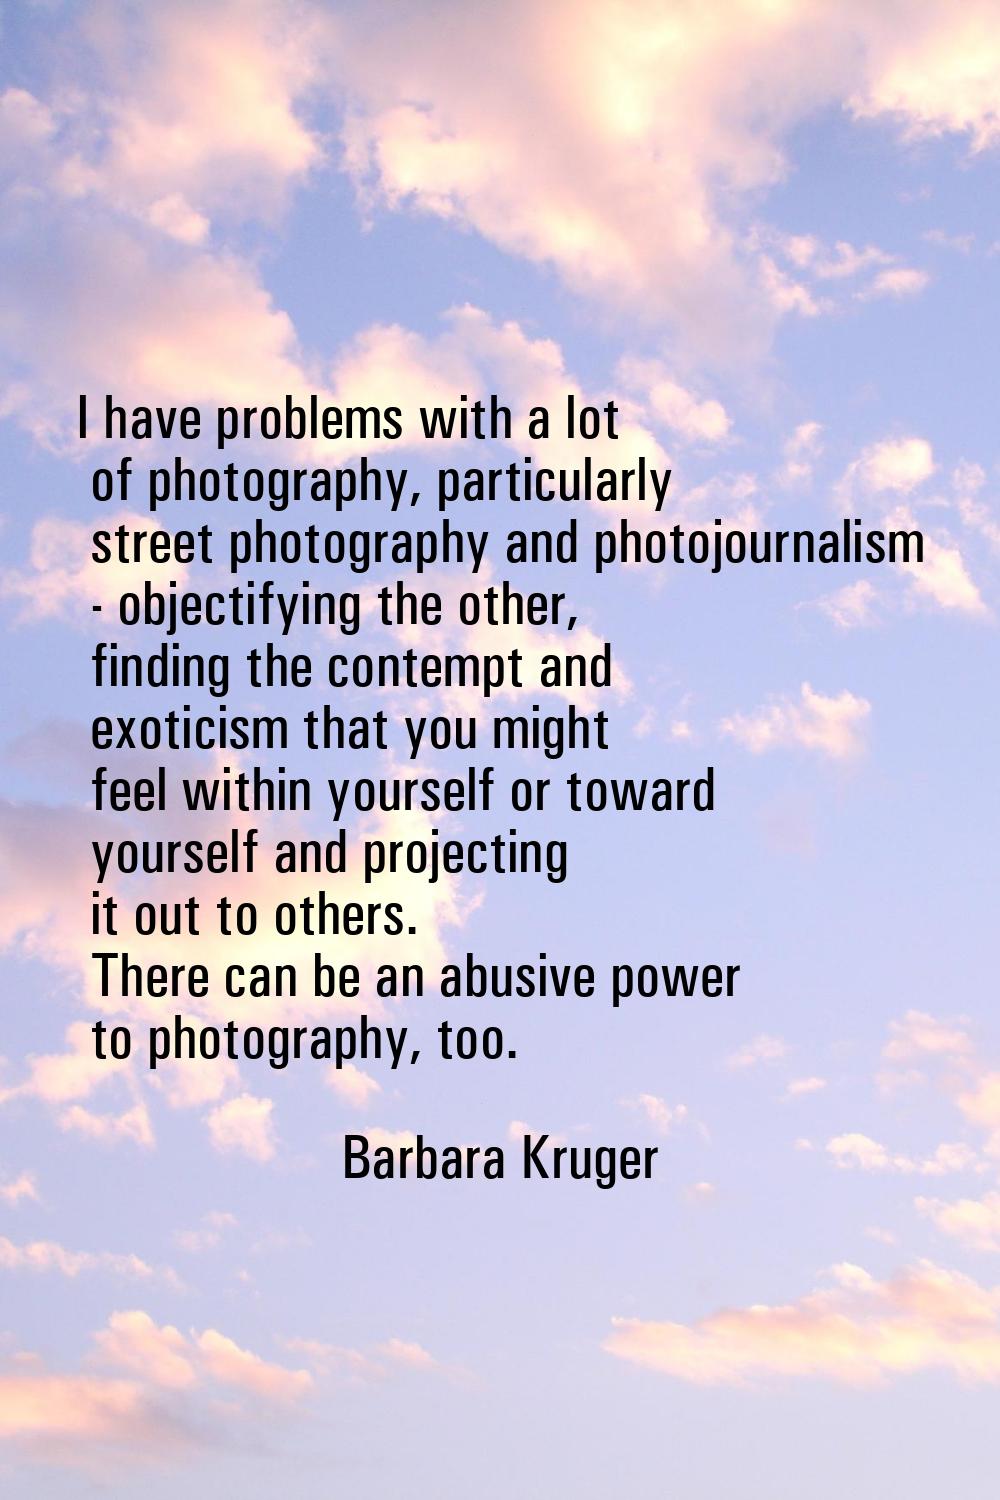 I have problems with a lot of photography, particularly street photography and photojournalism - ob